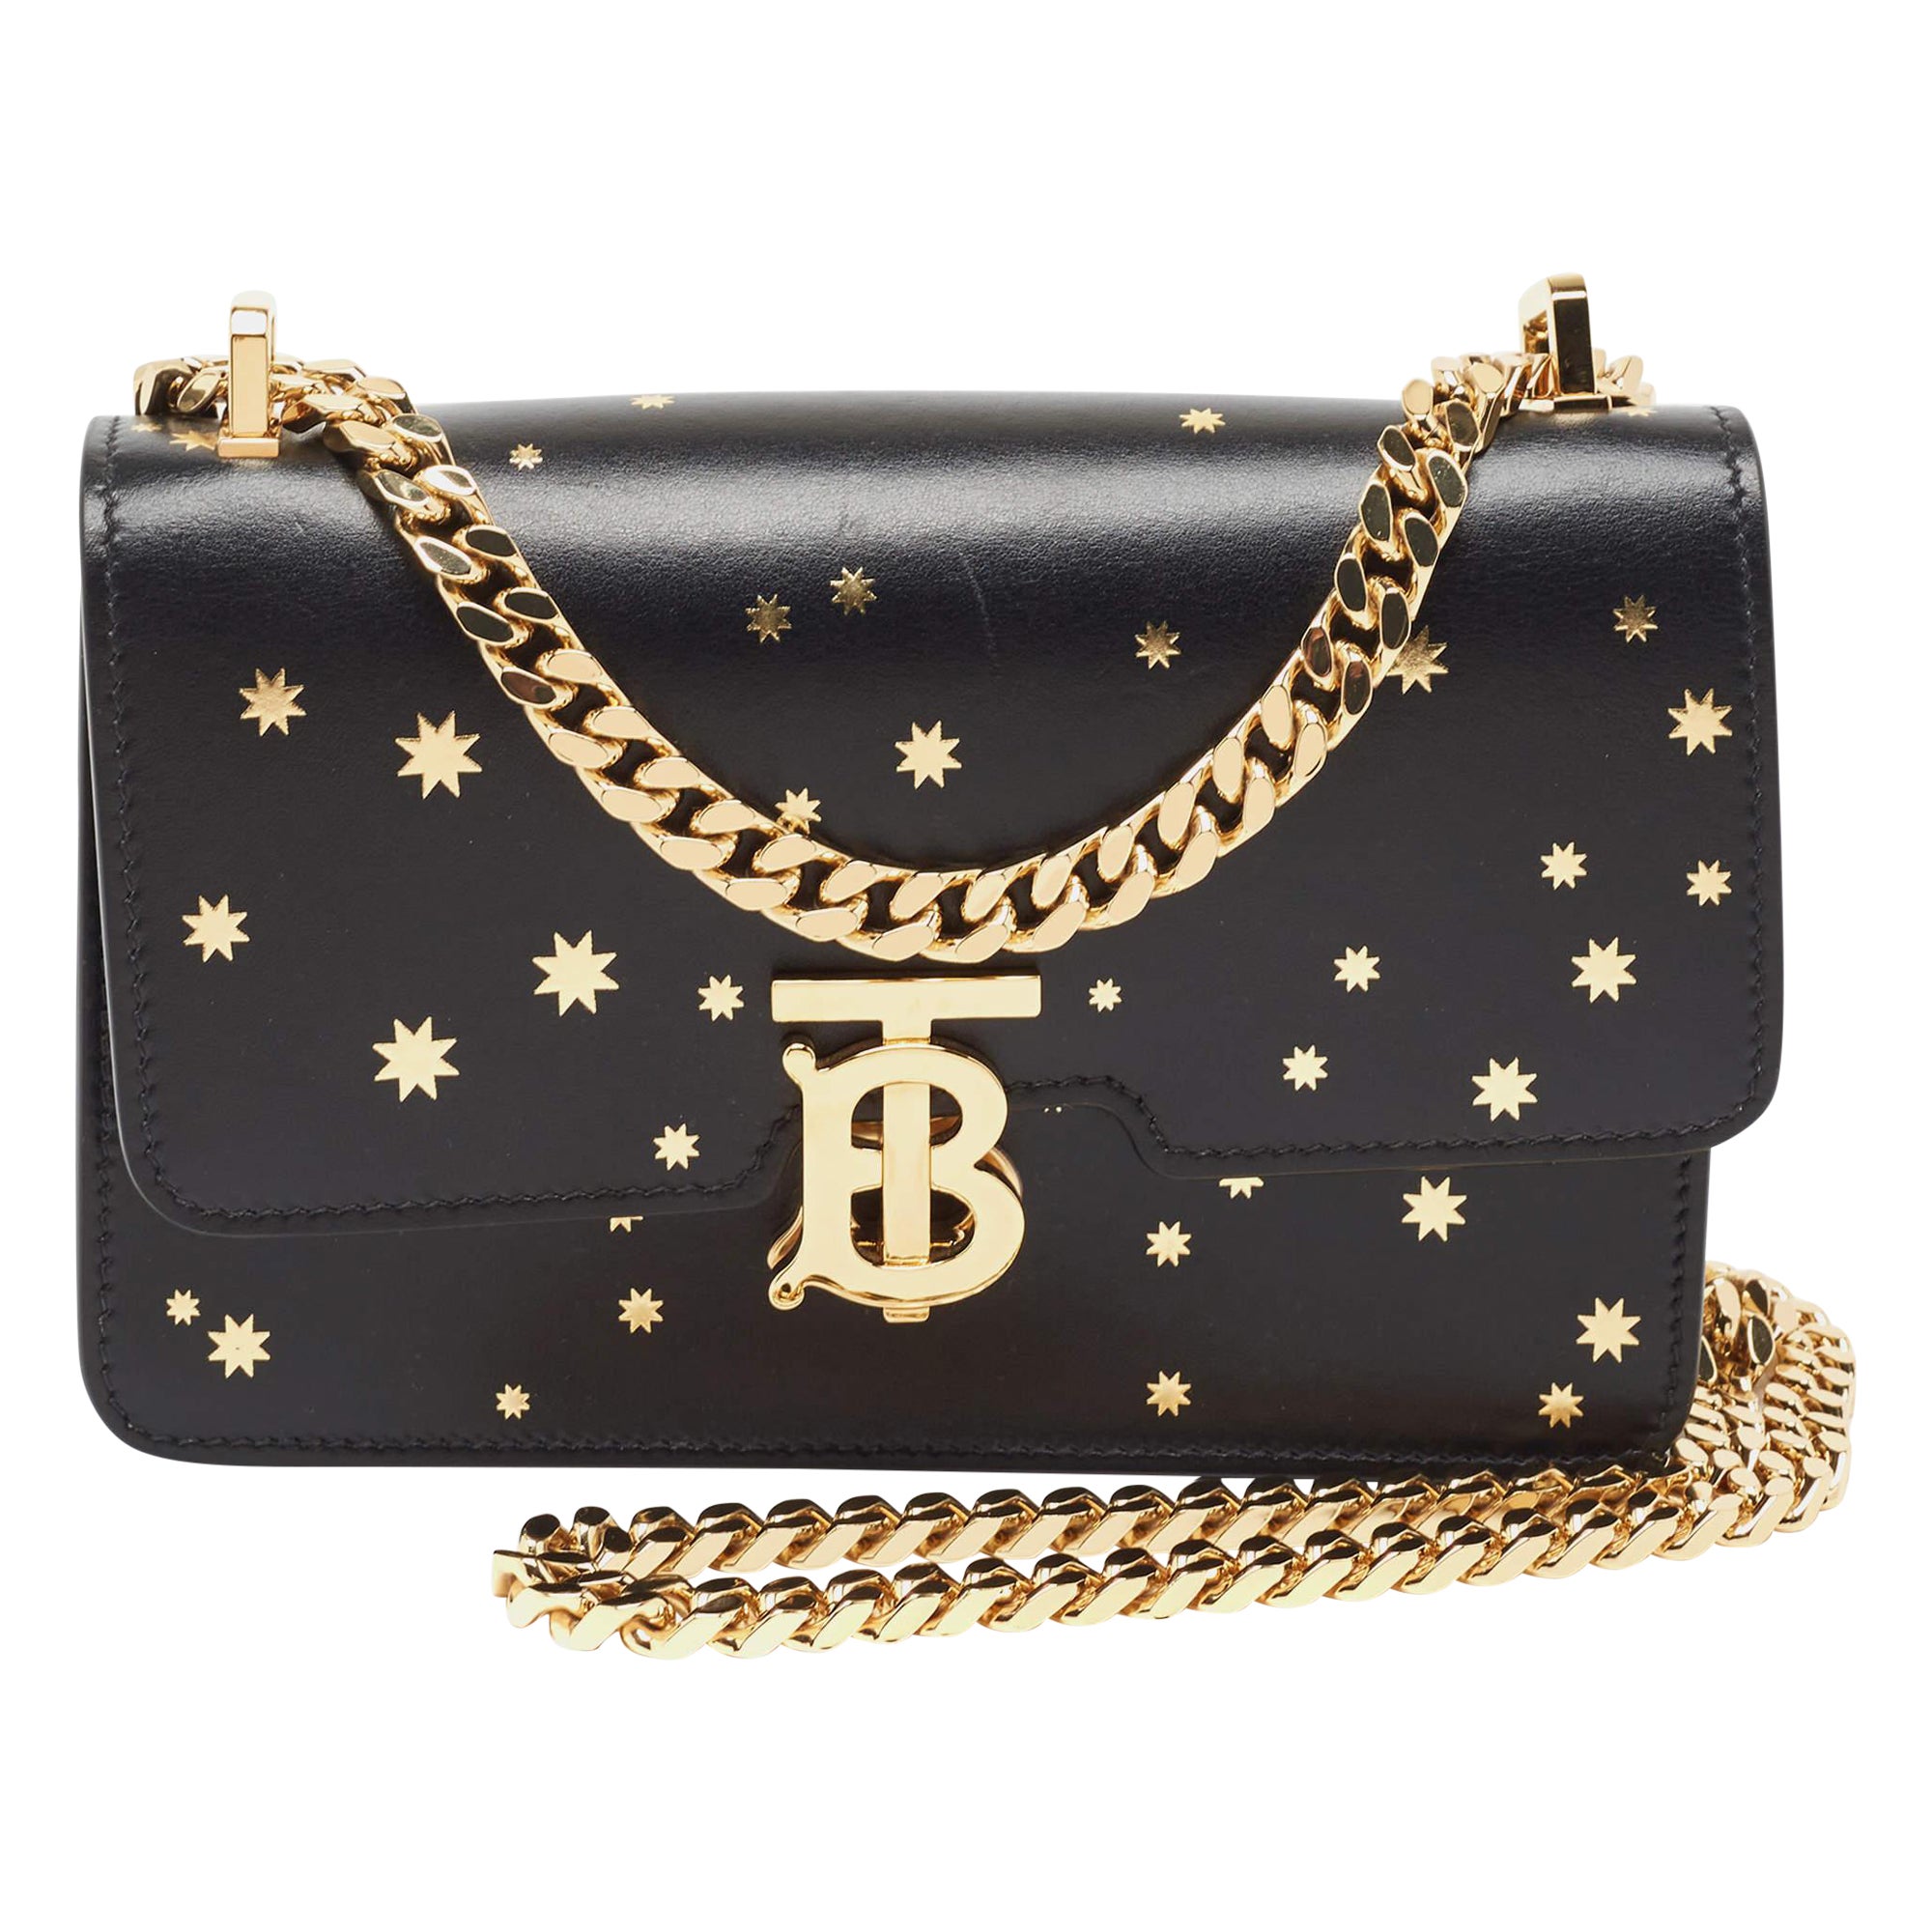 Burberry Black Leather TB Elongated Chain Bag For Sale